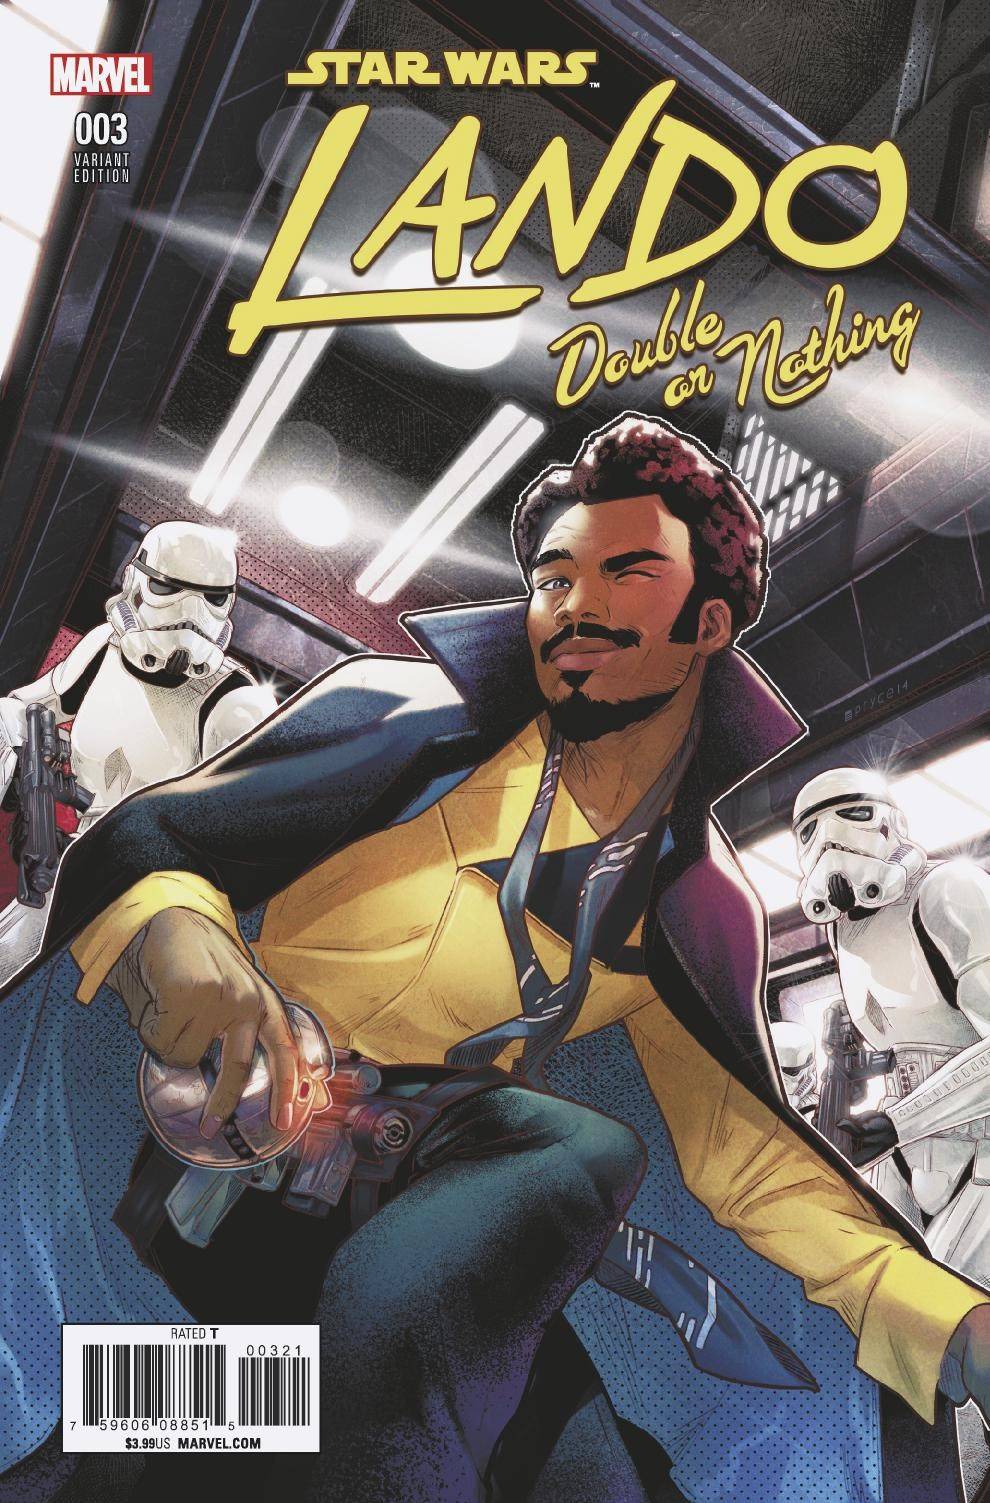 STAR WARS LANDO DOUBLE OR NOTHING #3 (OF 5) CAMPBELL VAR (07/25/2018)